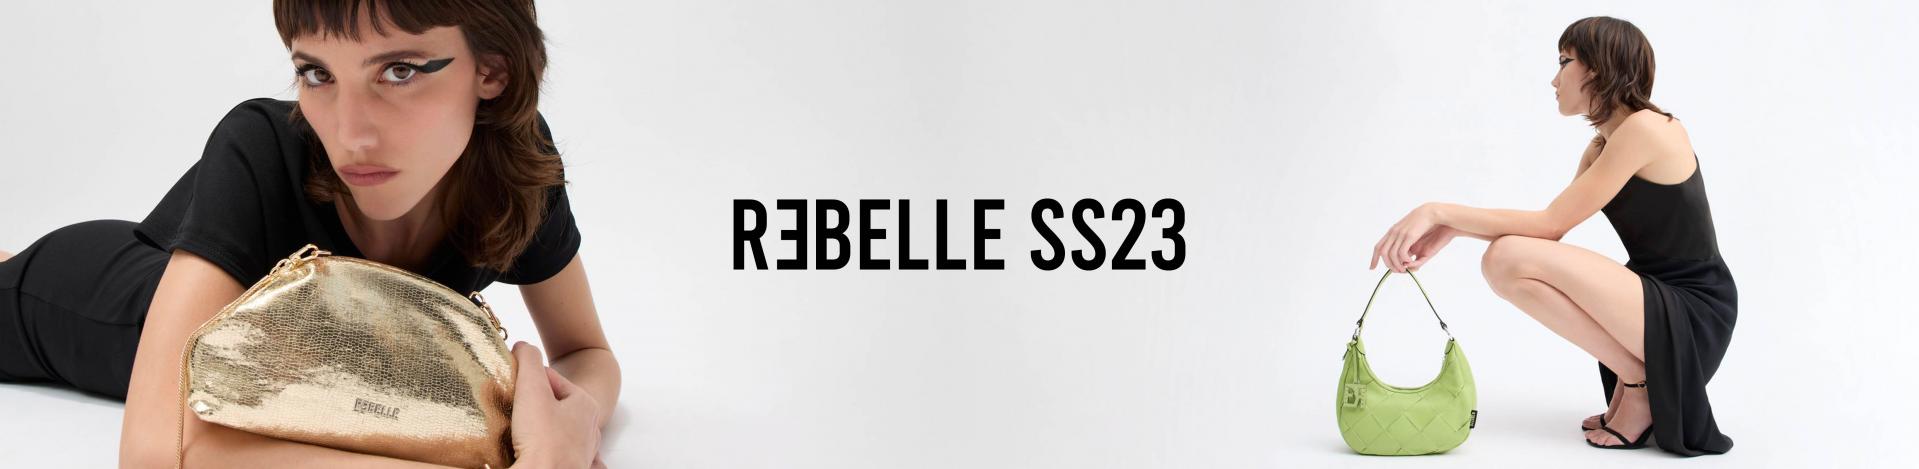 REBELLE SS23 COLLECTION : Light, urban and playful.